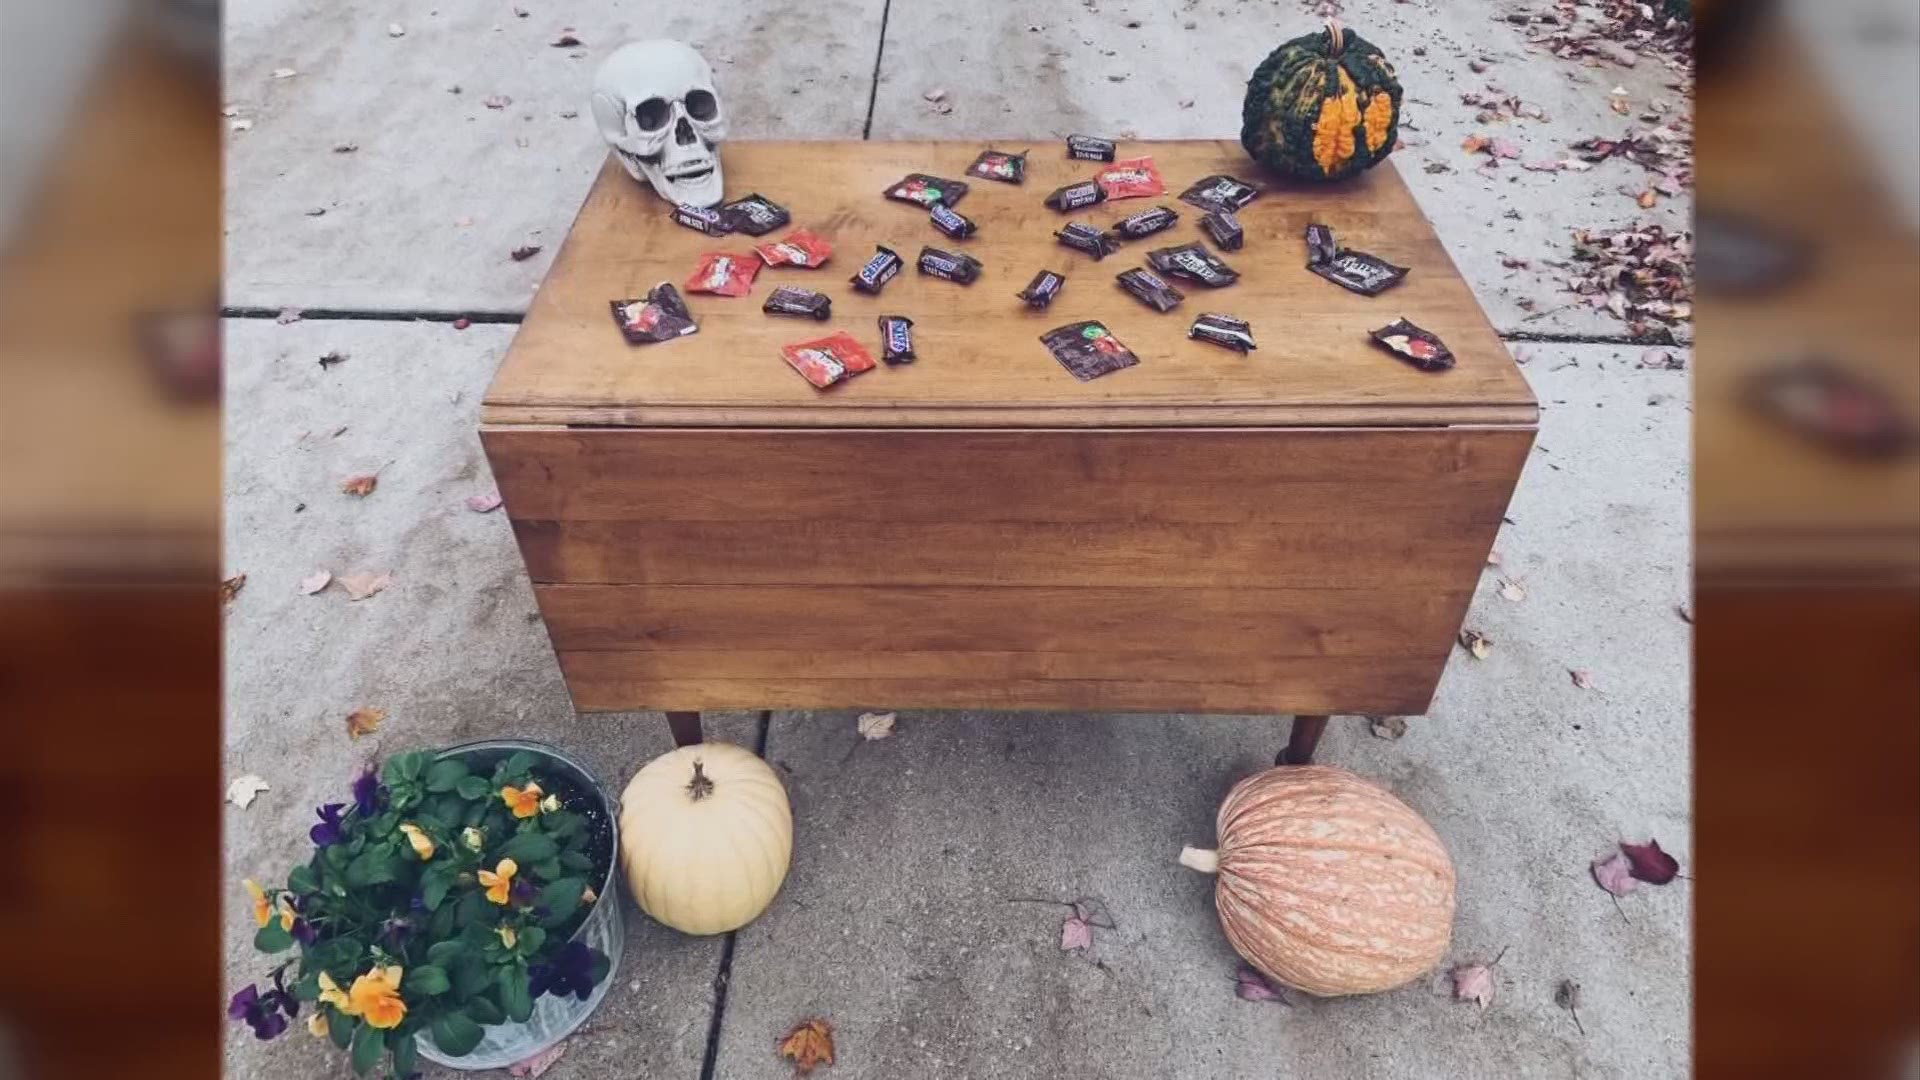 One family whose child has pulmonary issues won't be trick-or-treating, but came up with a candy scavenger hunt at home.